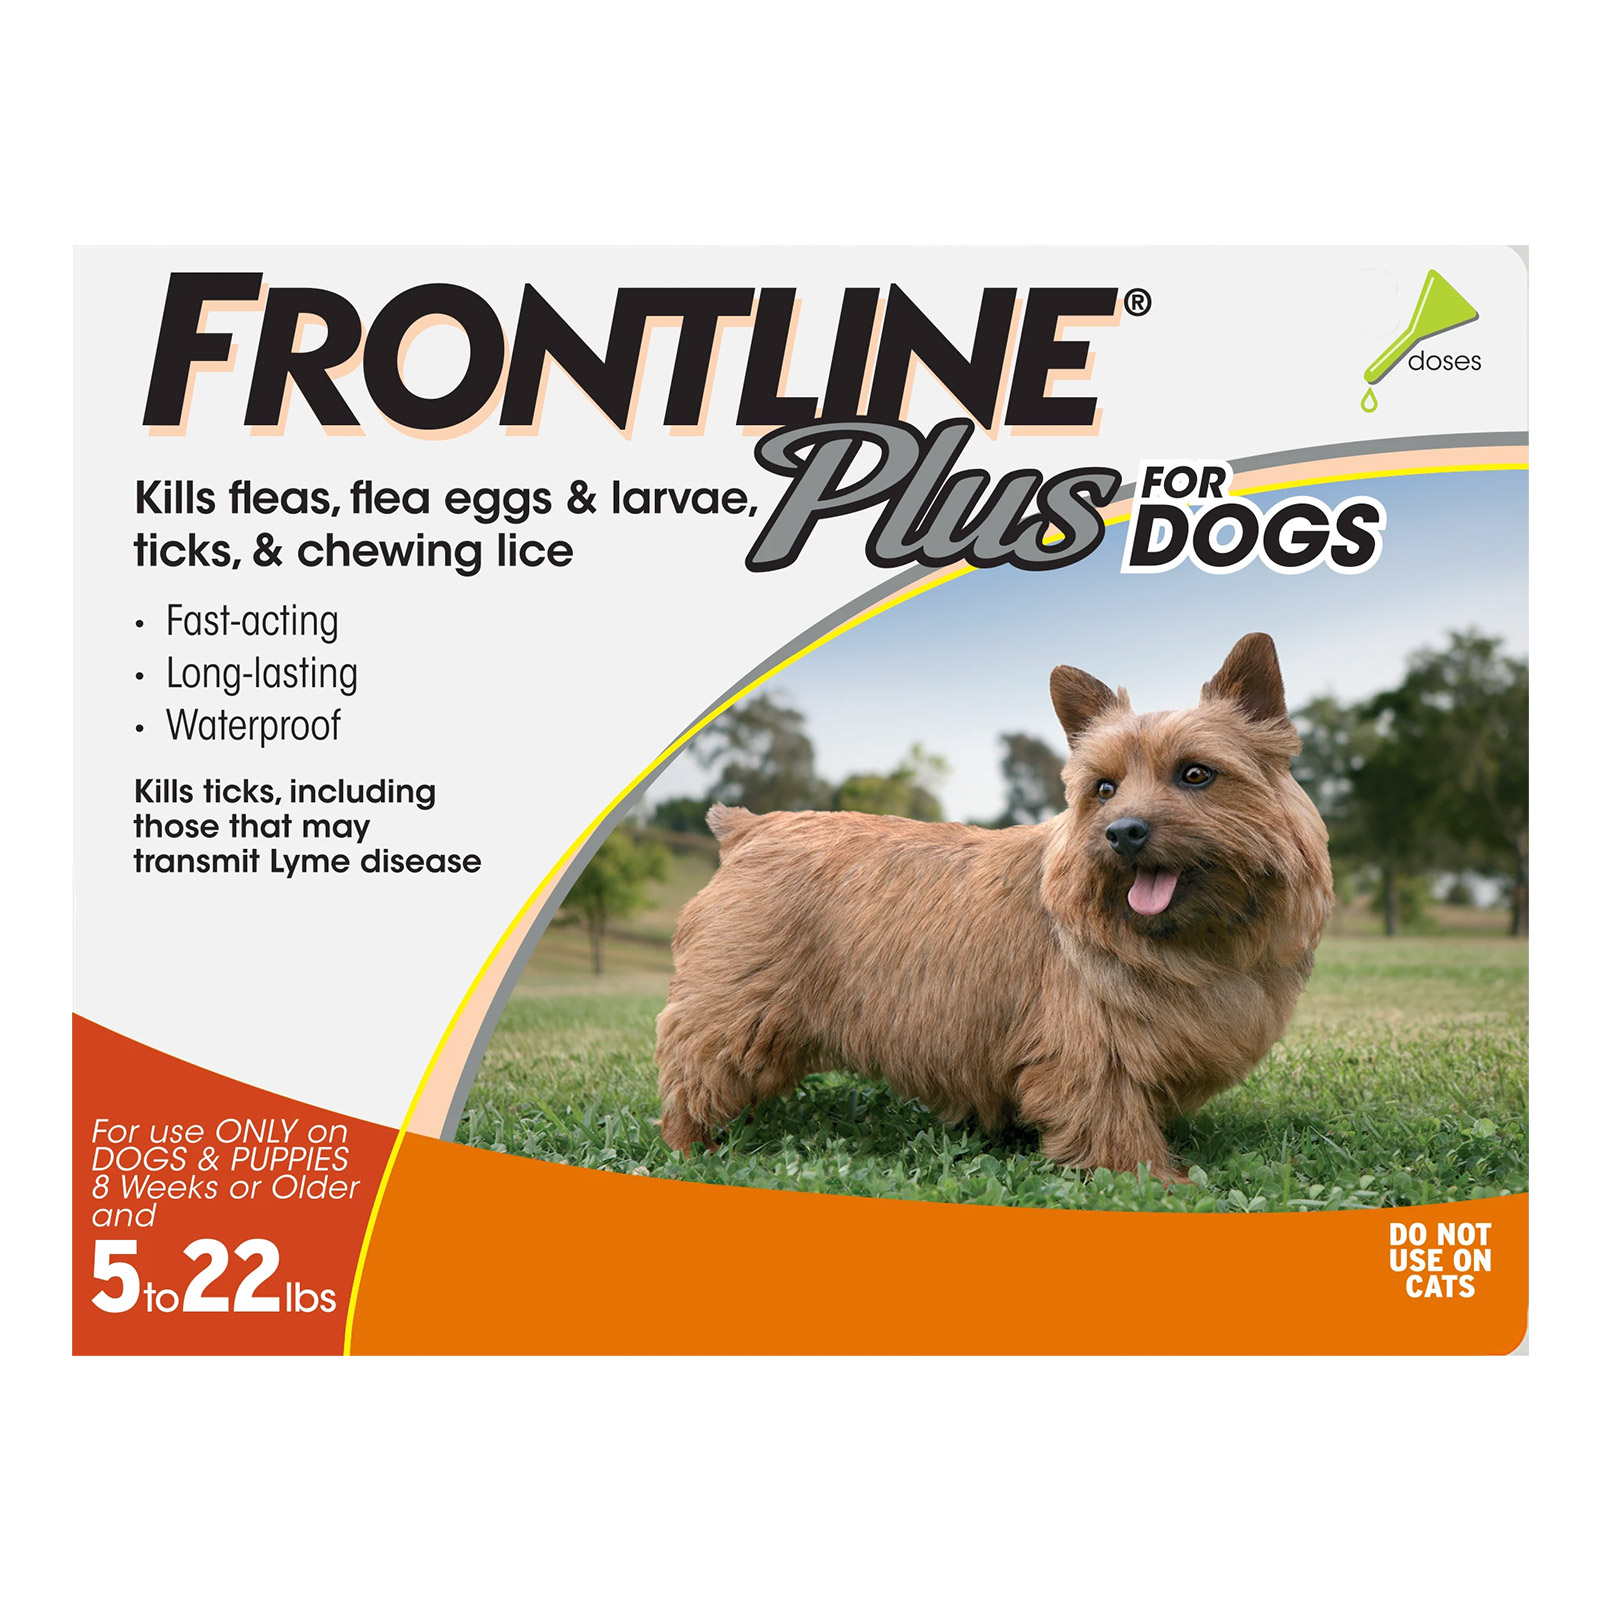 Frontline Plus For Small Dogs Up To 22lbs Orange 6 Months
